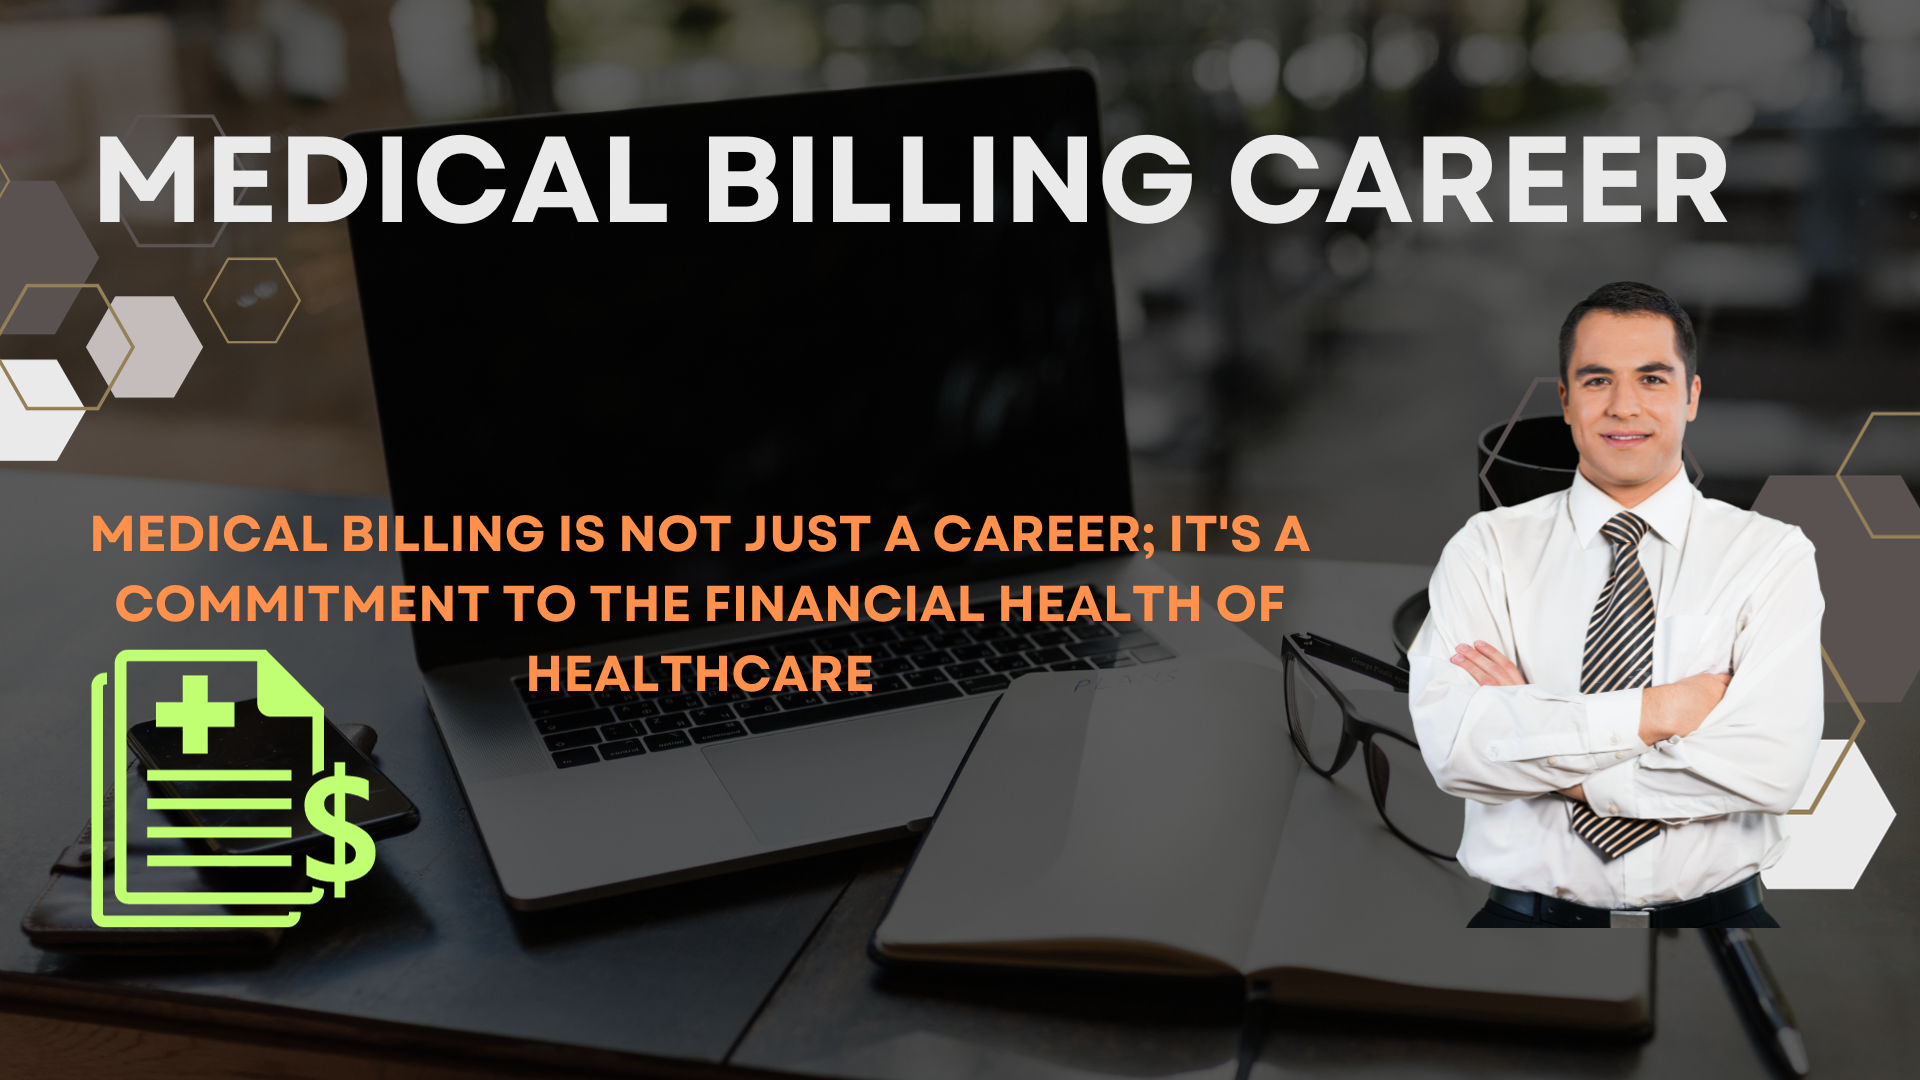 MEDICAL BILLING CAREER

Sd
MEDICAL BILLING IS NOT JUST A CAREER; IT'S A

COMMITMENT TO THE FINANCIAL HEALTH OF
iE HEALTHCARE

=